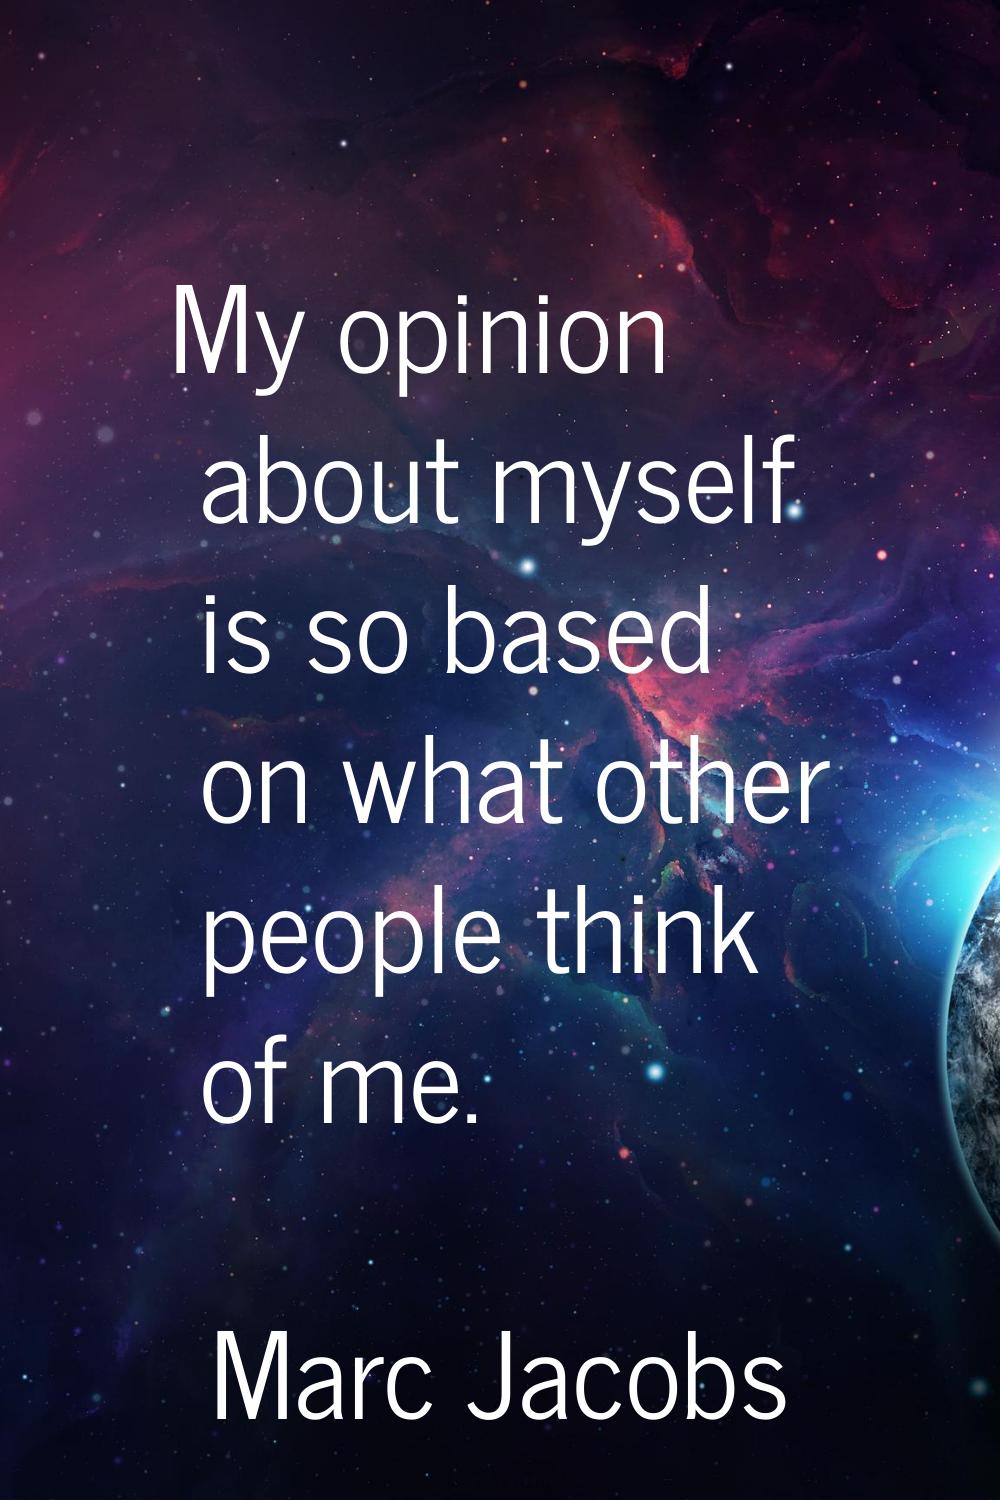 My opinion about myself is so based on what other people think of me.